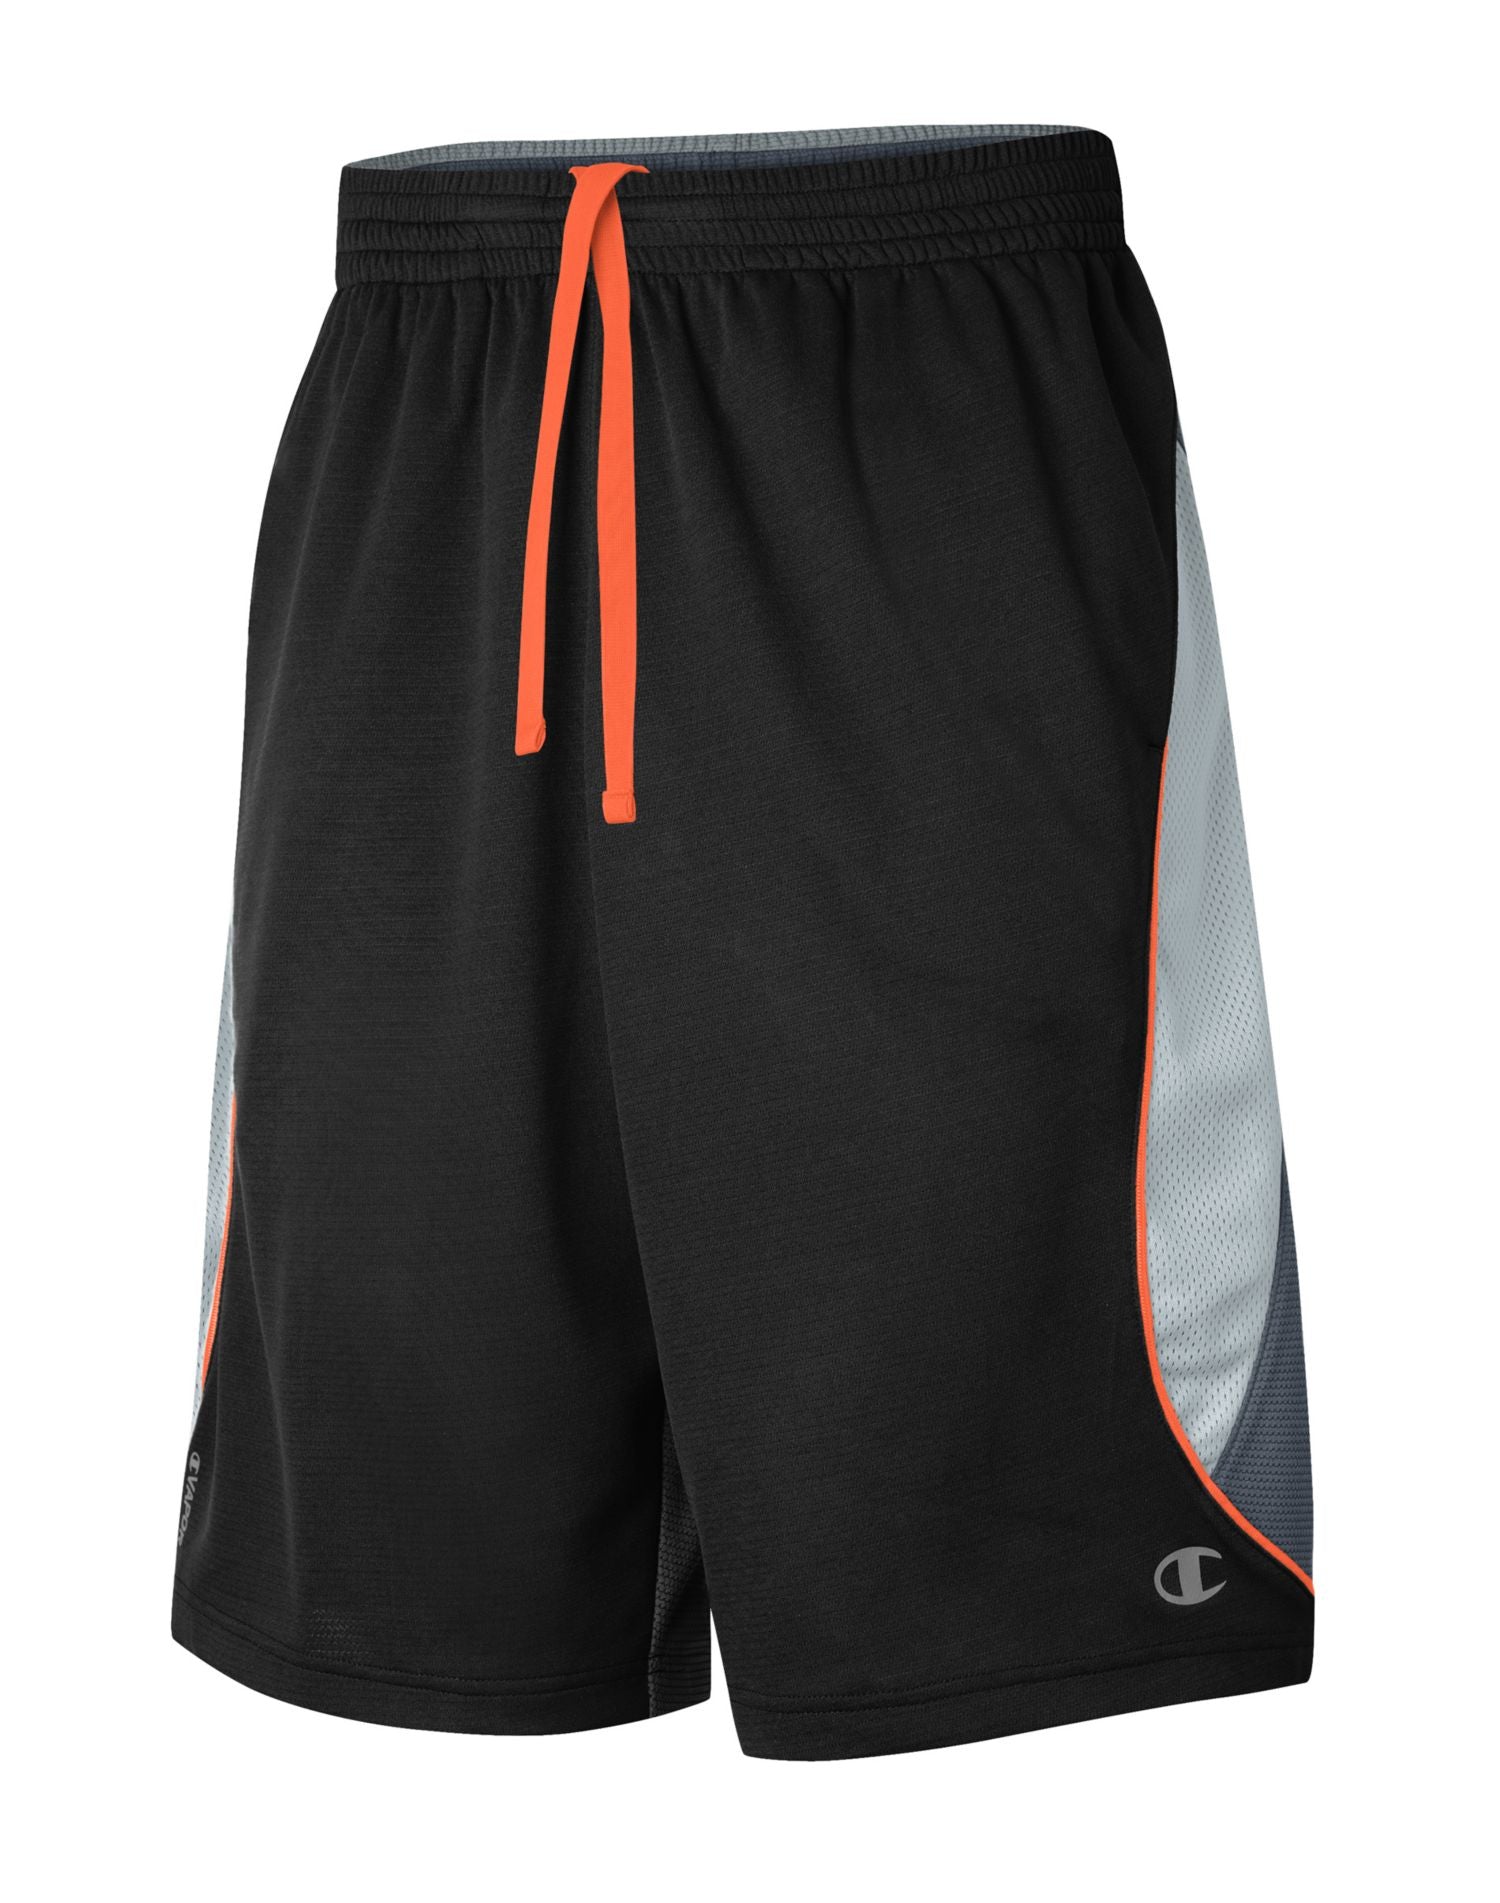 Gear Men`s Authentic Basketball Shorts